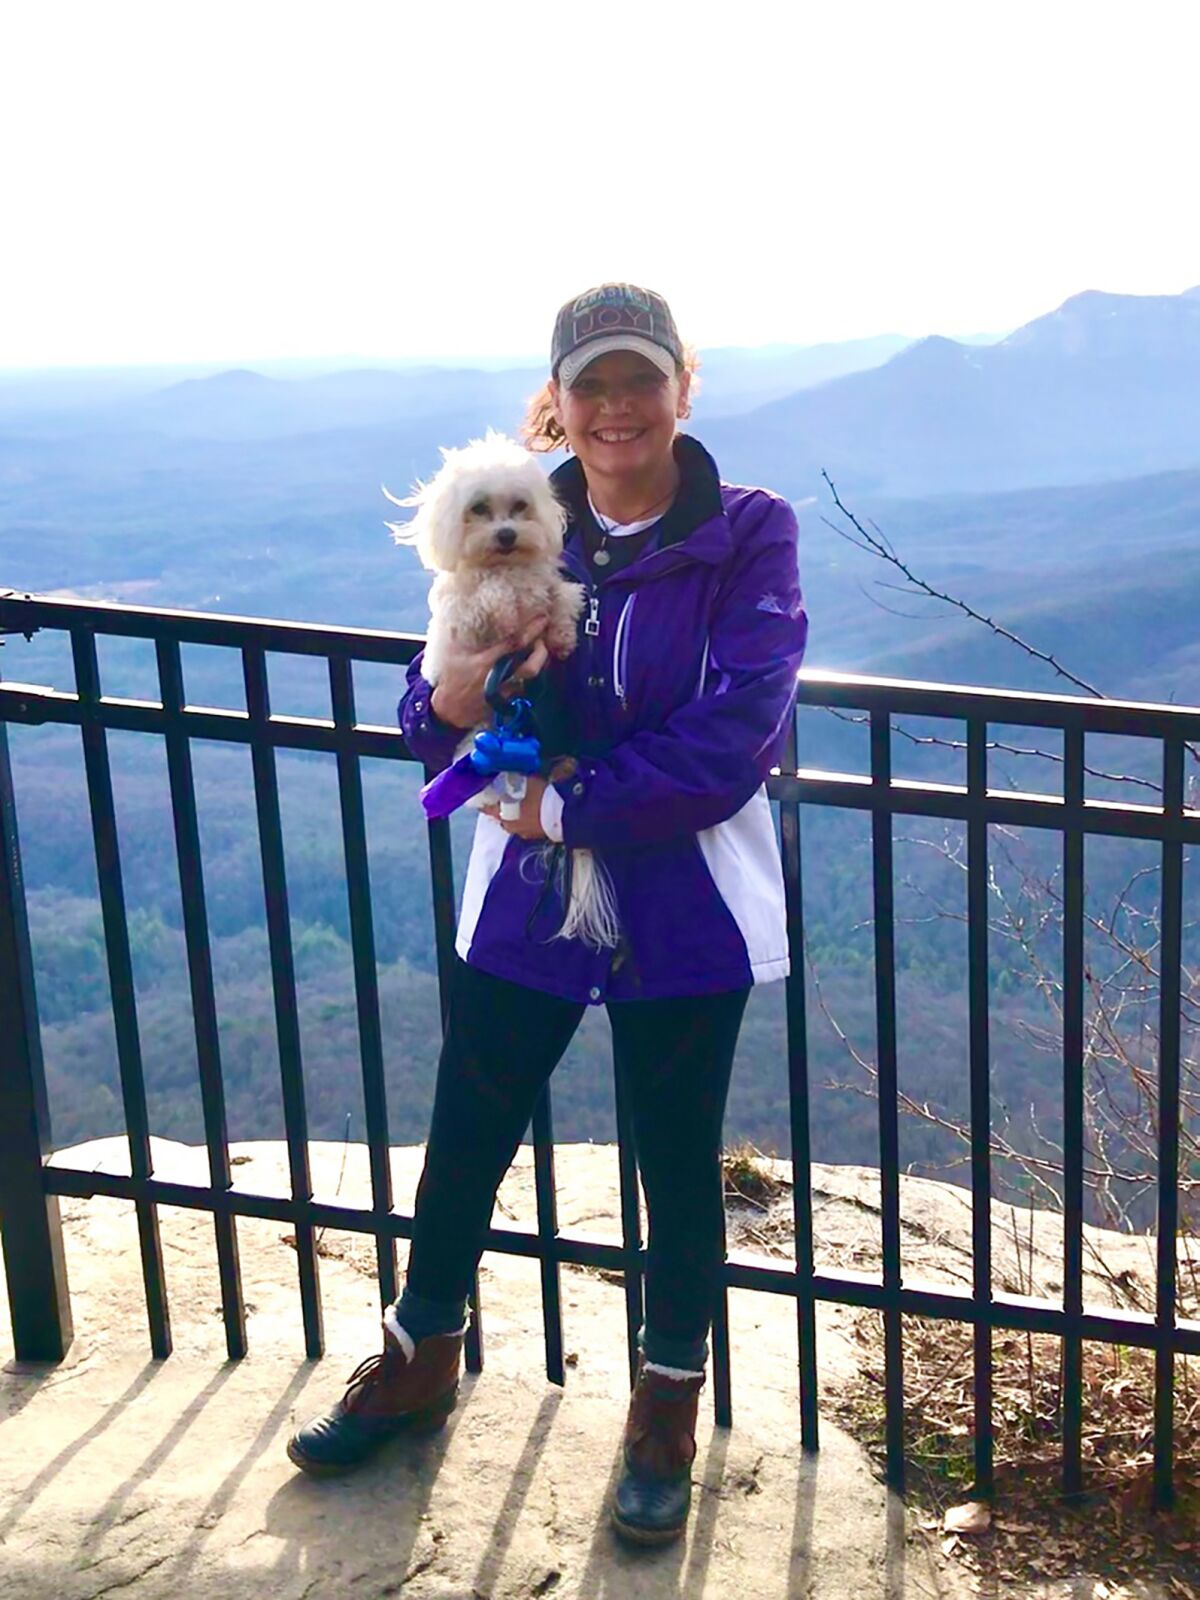 A woman holds a small white dog and poses for a photo in front of a mountain landscape.